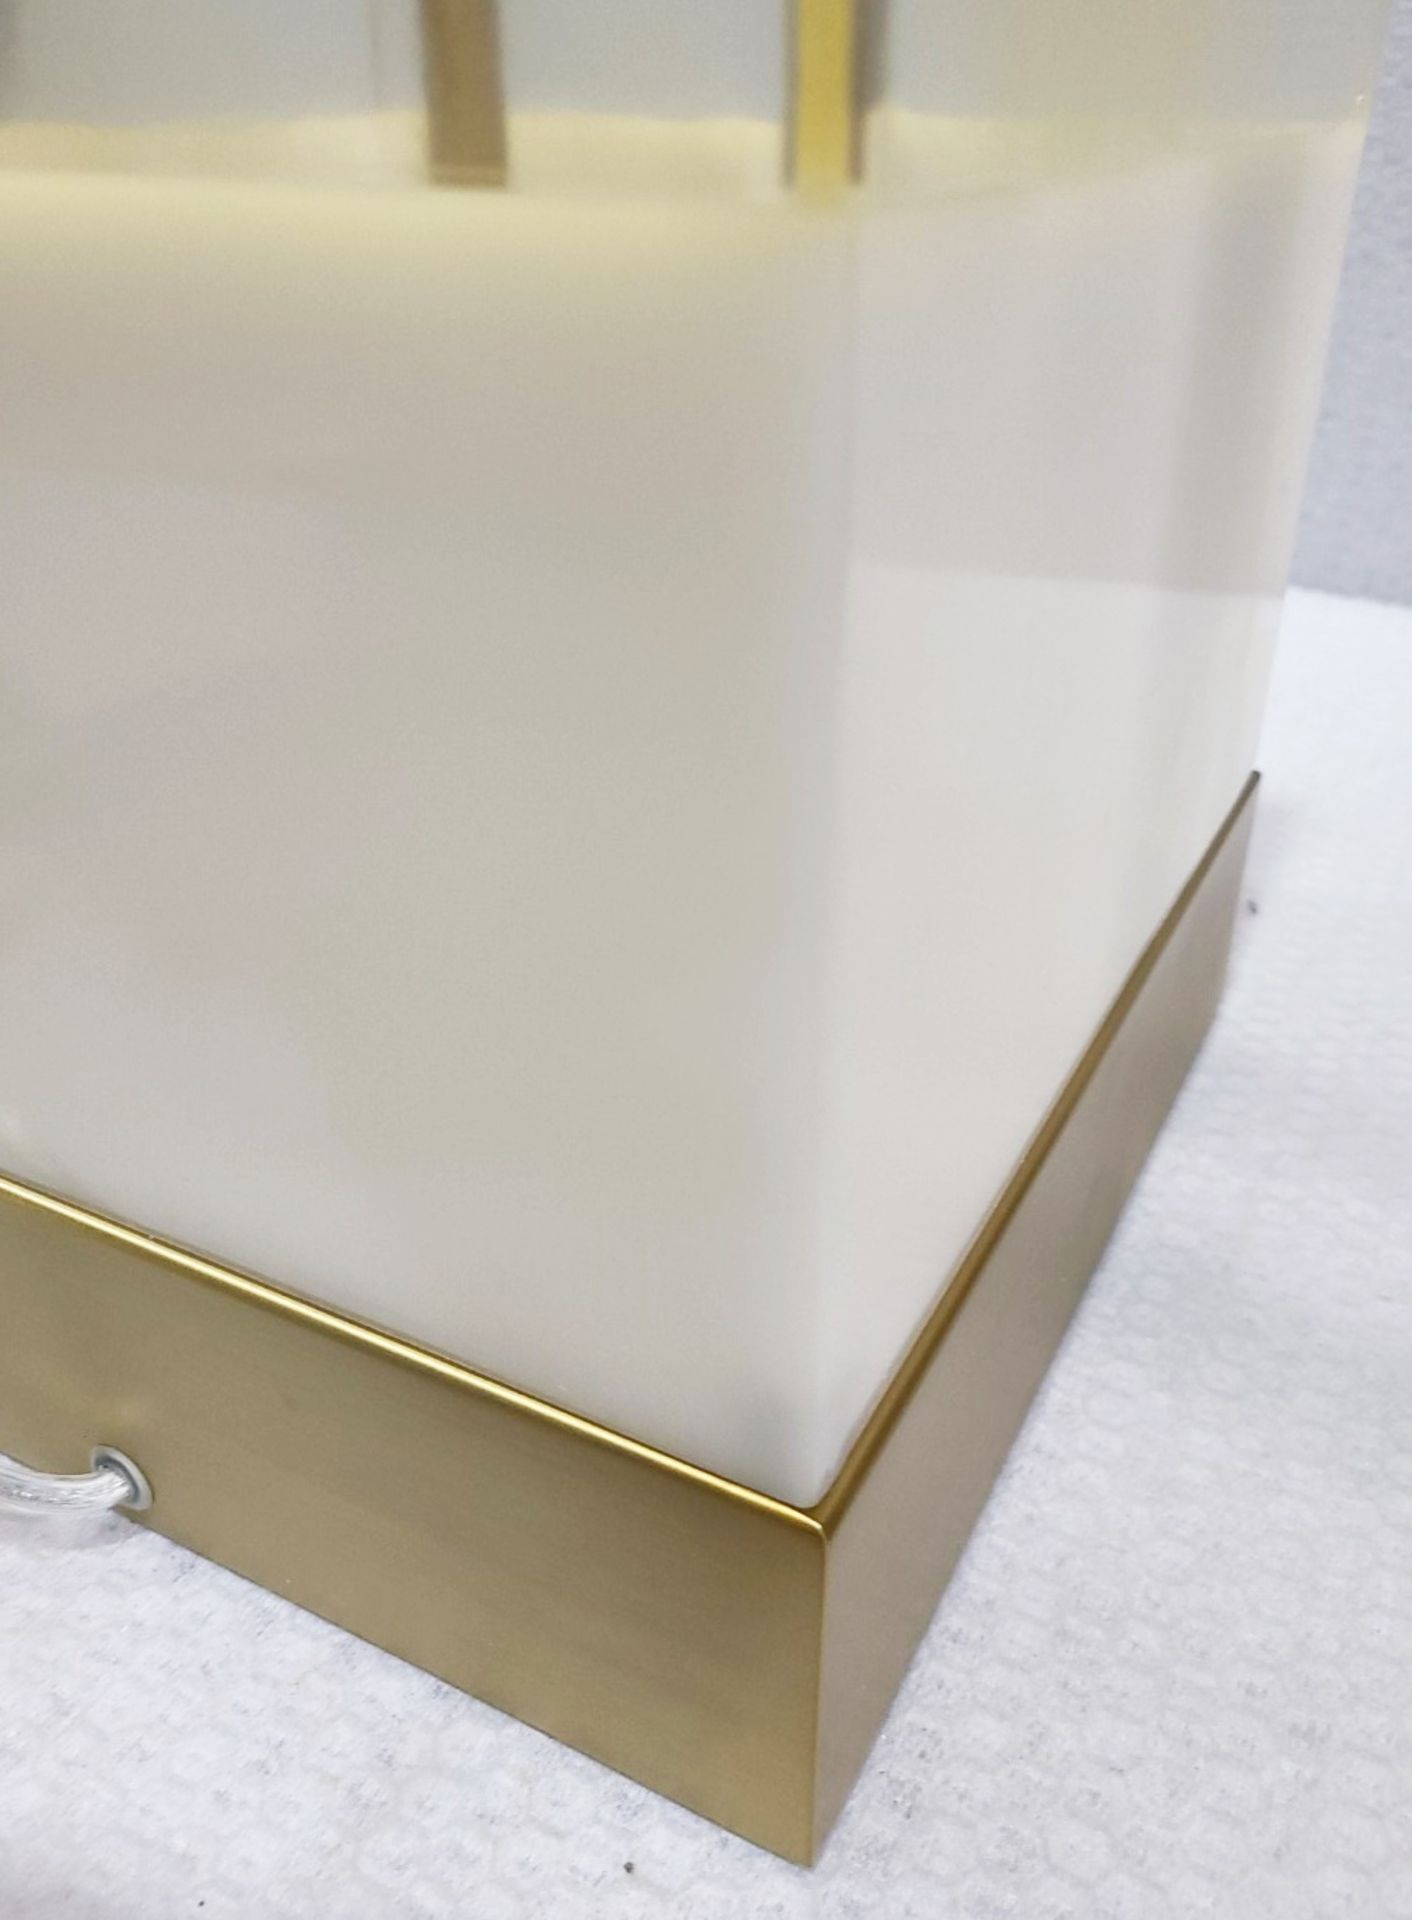 1 x CHELSOM Rectangular Gold Tinted Glass Box Table Lamp With Stone Lower Third And Brass Base - Image 4 of 10